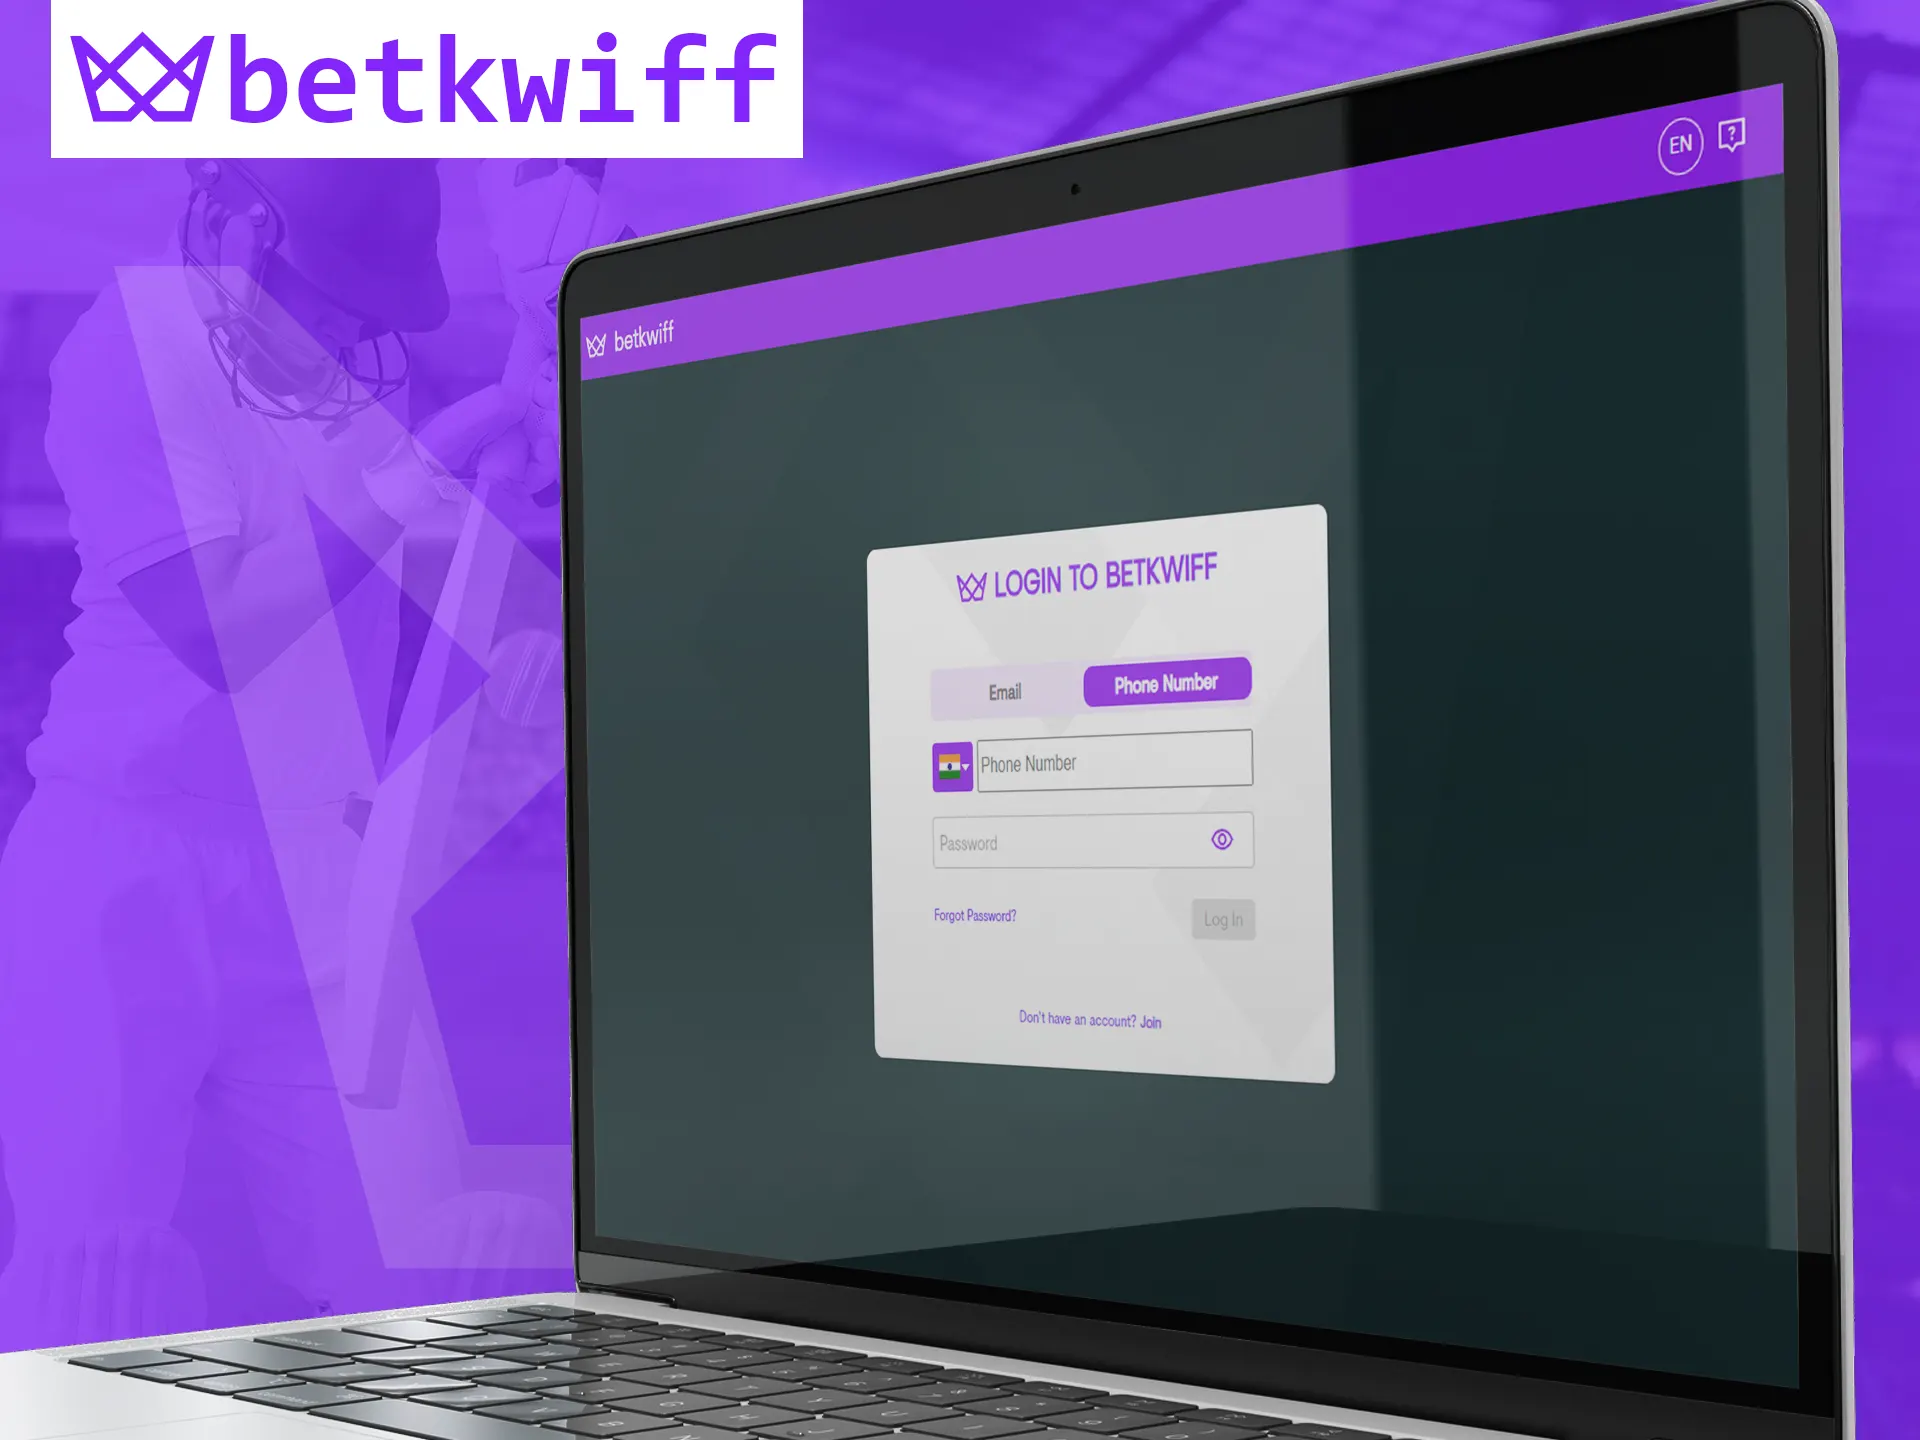 Log in to your Betkwiff account.